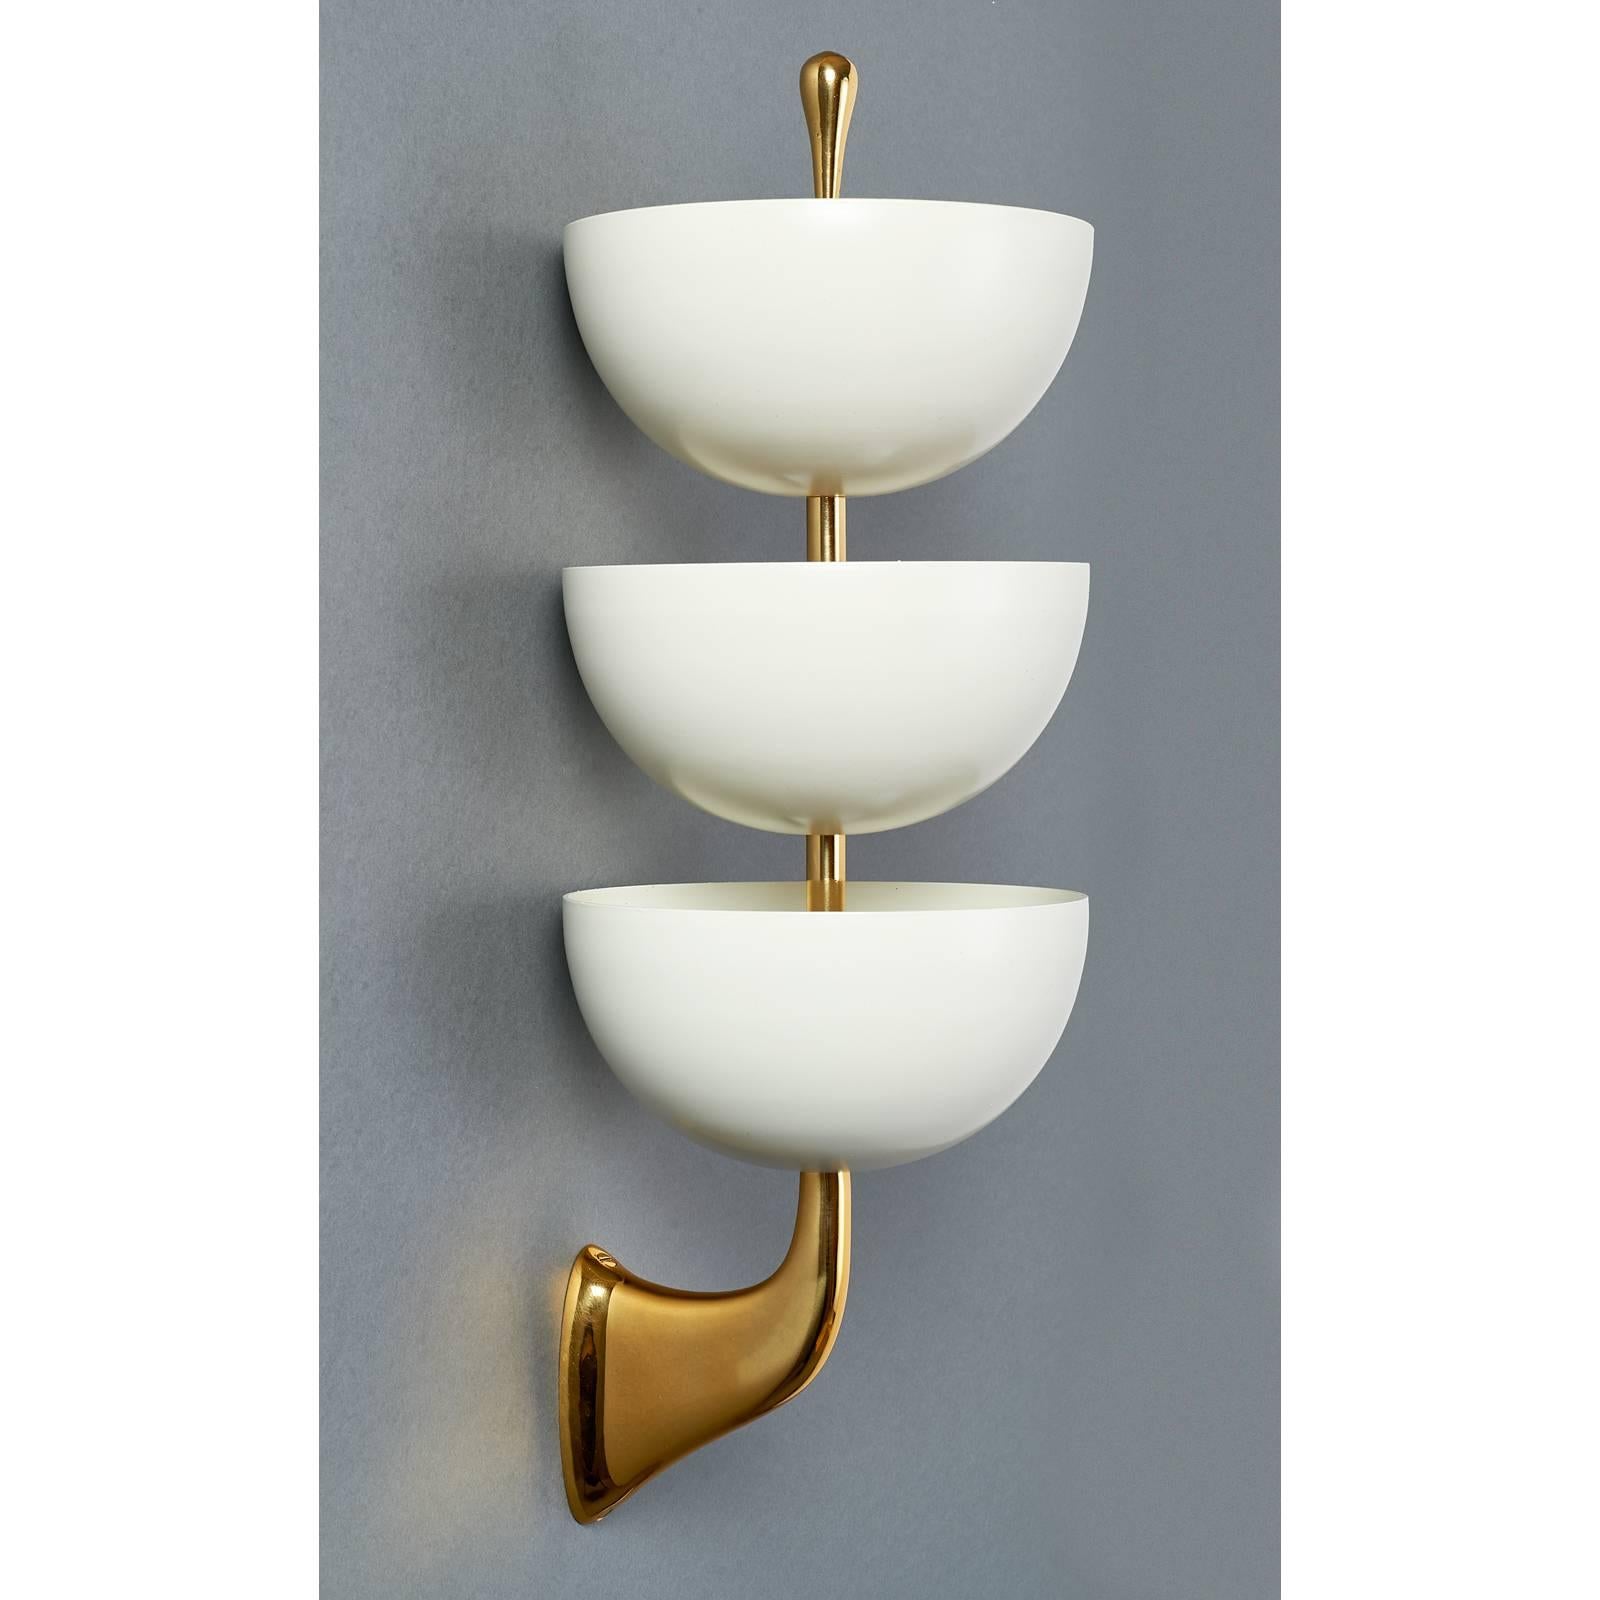 Stilnovo
Pair of three-tiered enameled metal sconces by Stilnovo with sculpted polished brass mounts.
Italy, 1950s, signed.
Rewired for use in the USA with three small chandelier base bulbs in each cup. Wall plate size for American box